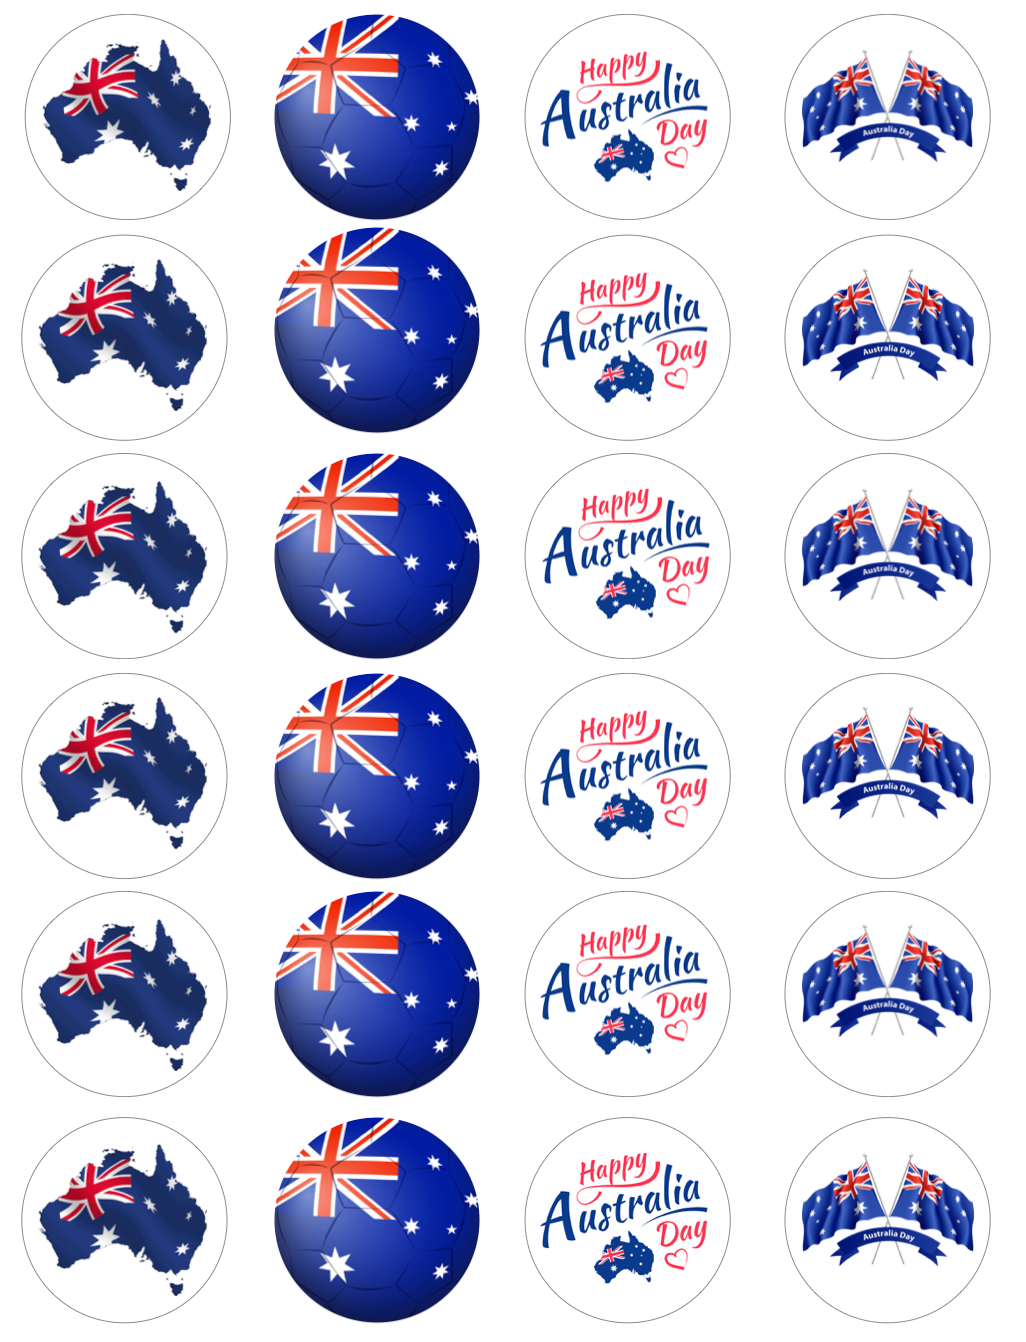 Australia Day Cupcake Edible Icing Image Toppers